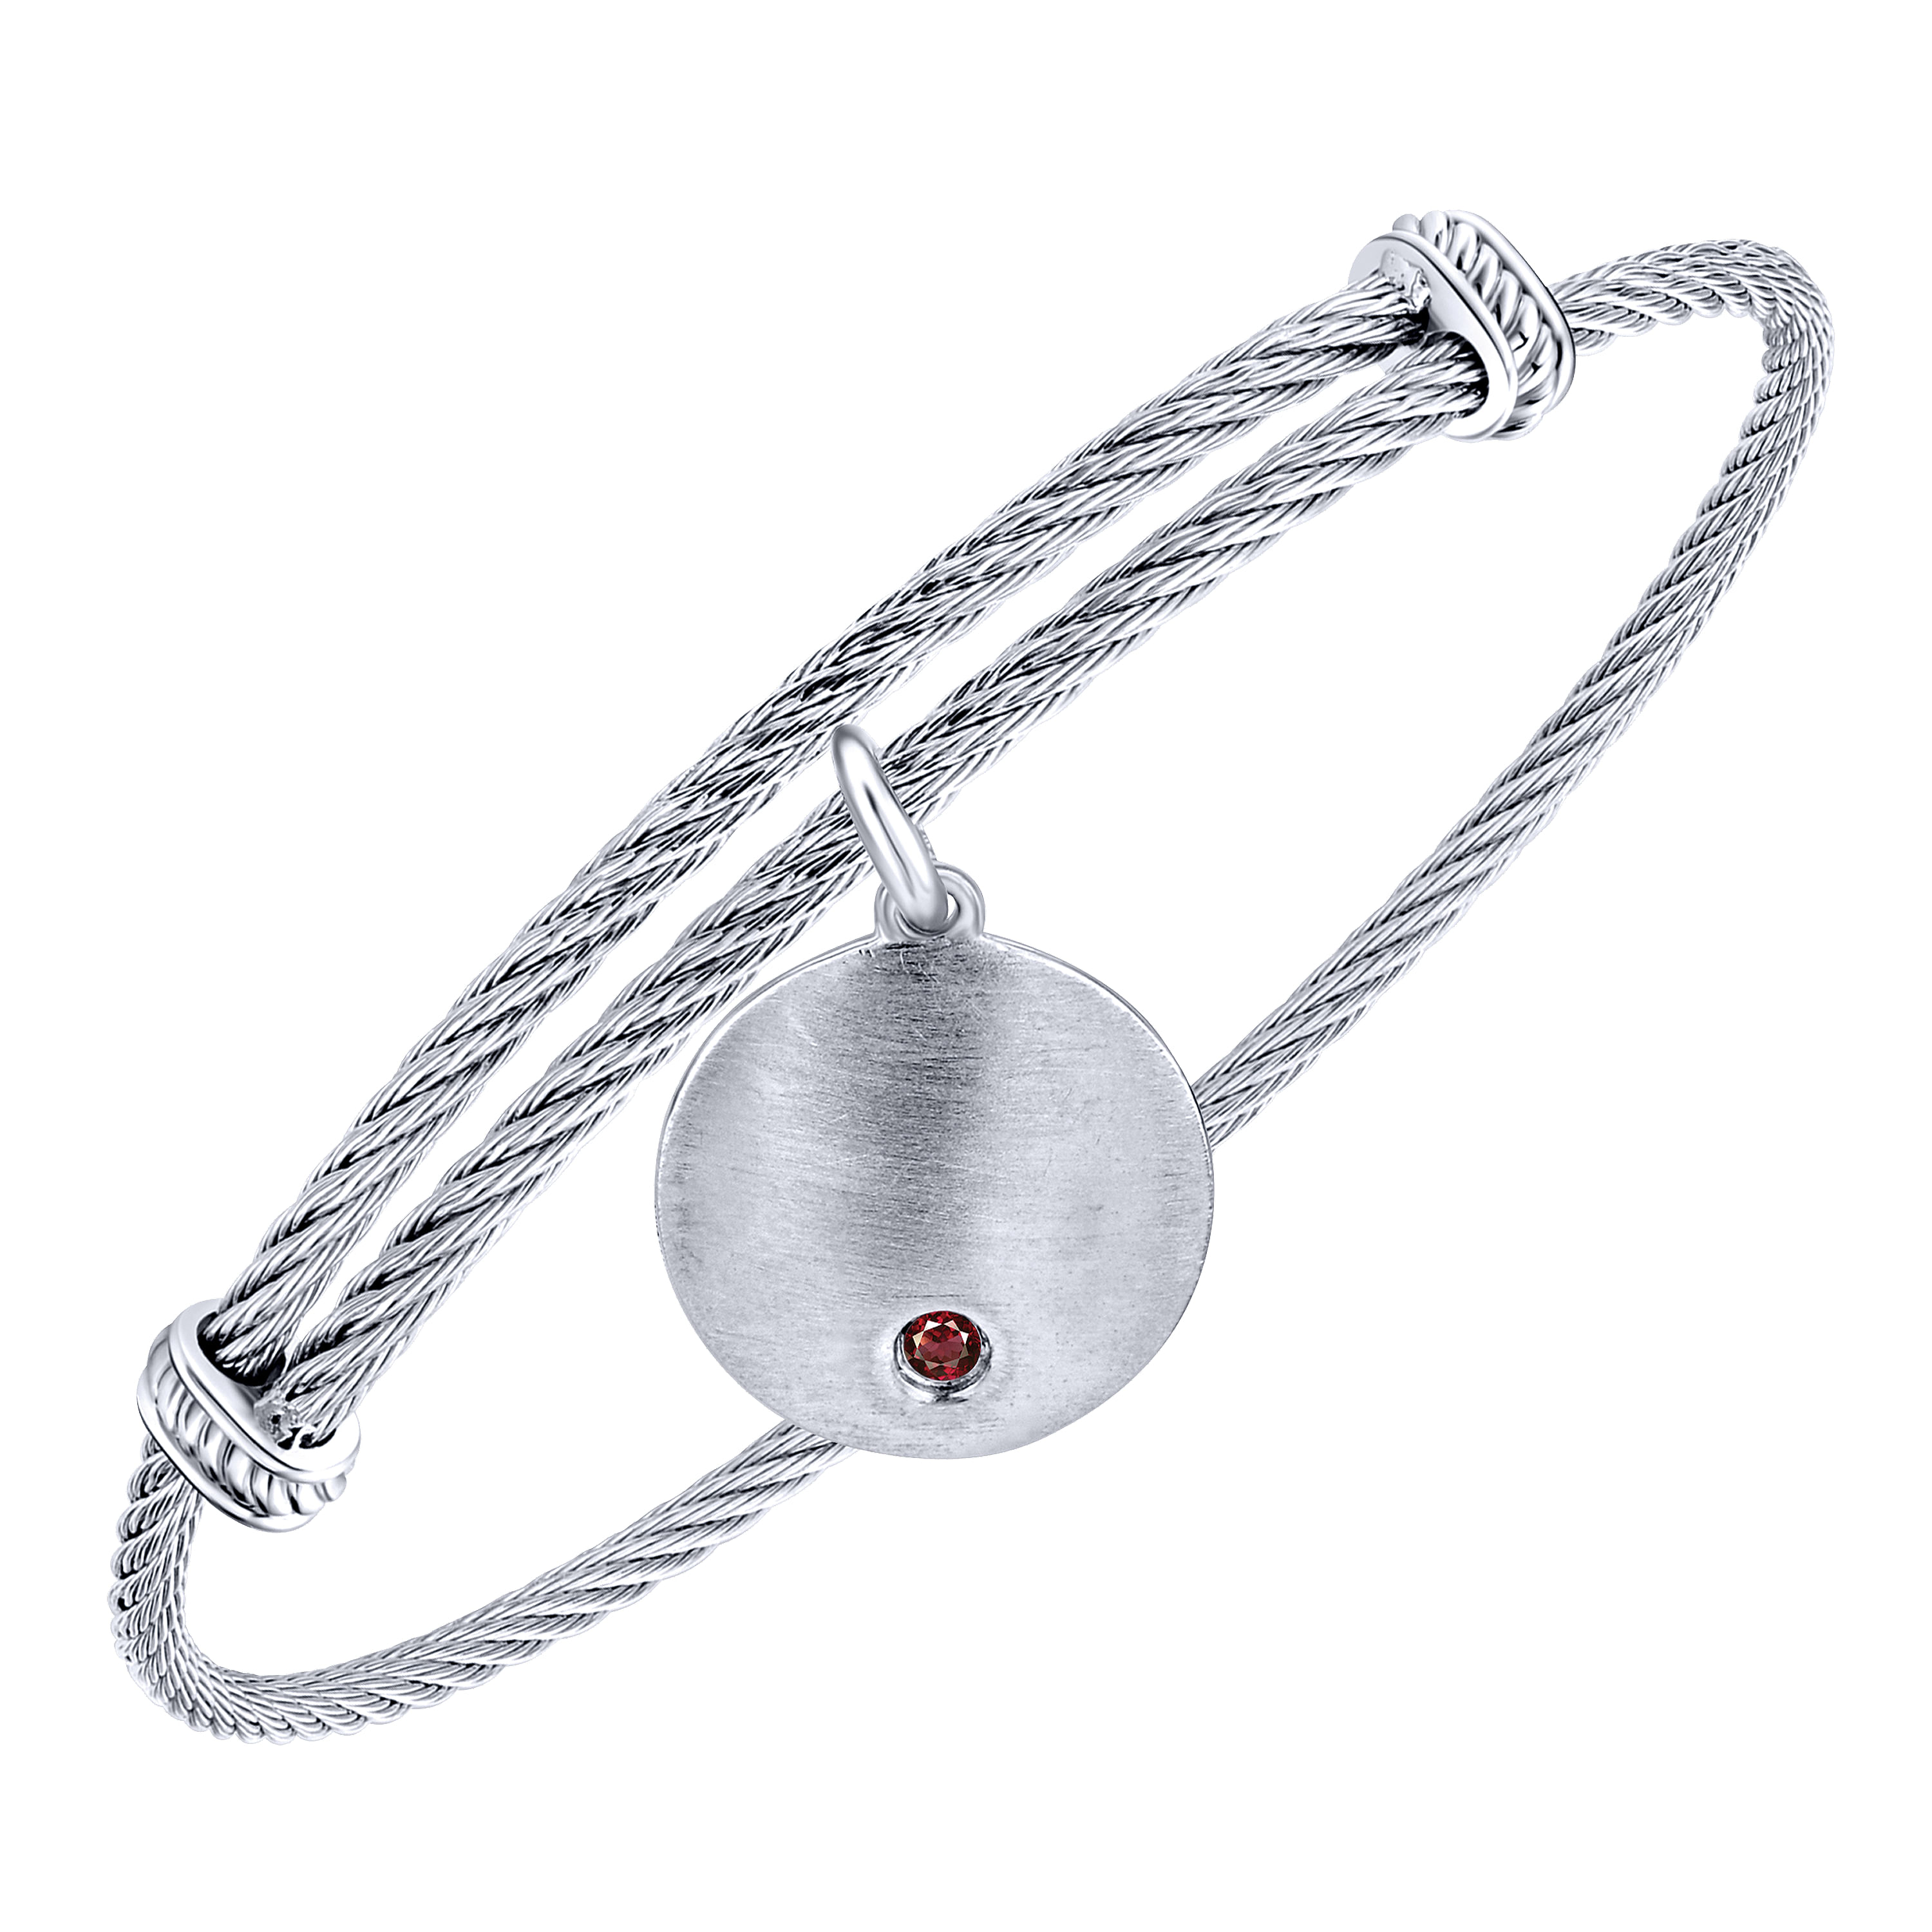 Adjustable Stainless Steel Bangle with Round Sterling Silver Garnet Stone Disc Charm